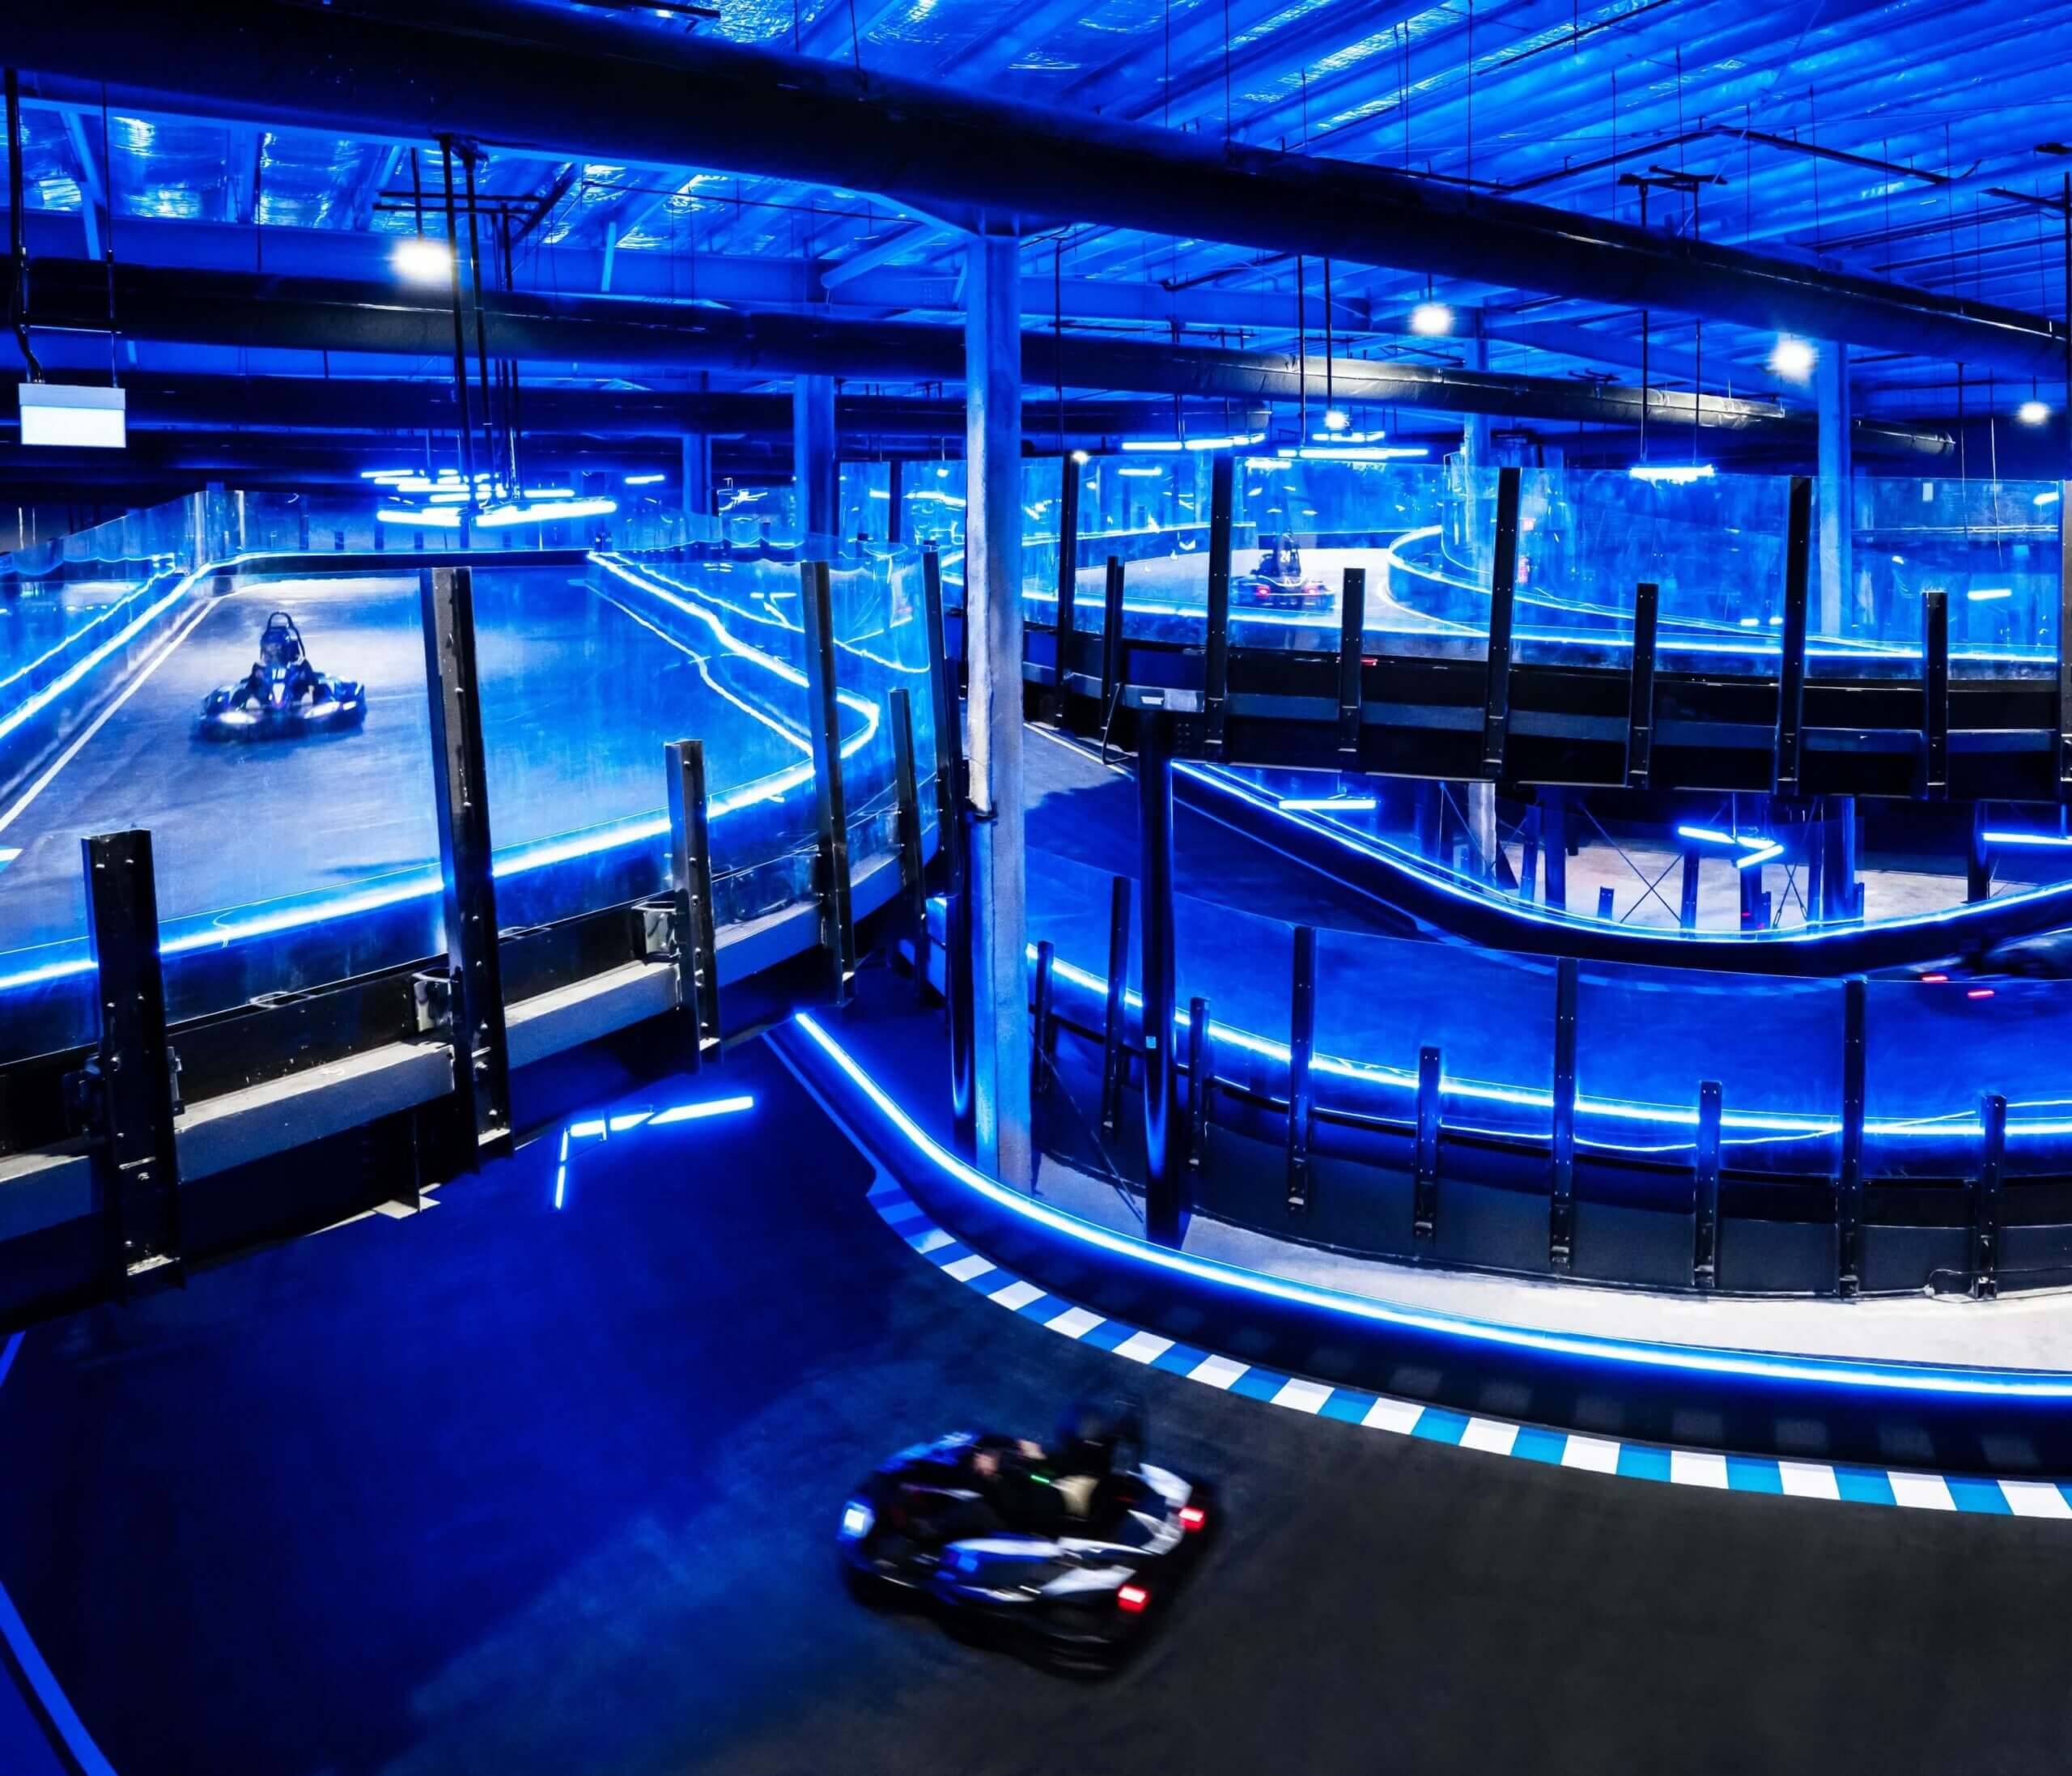 3-level indoor track with 14 exciting turns